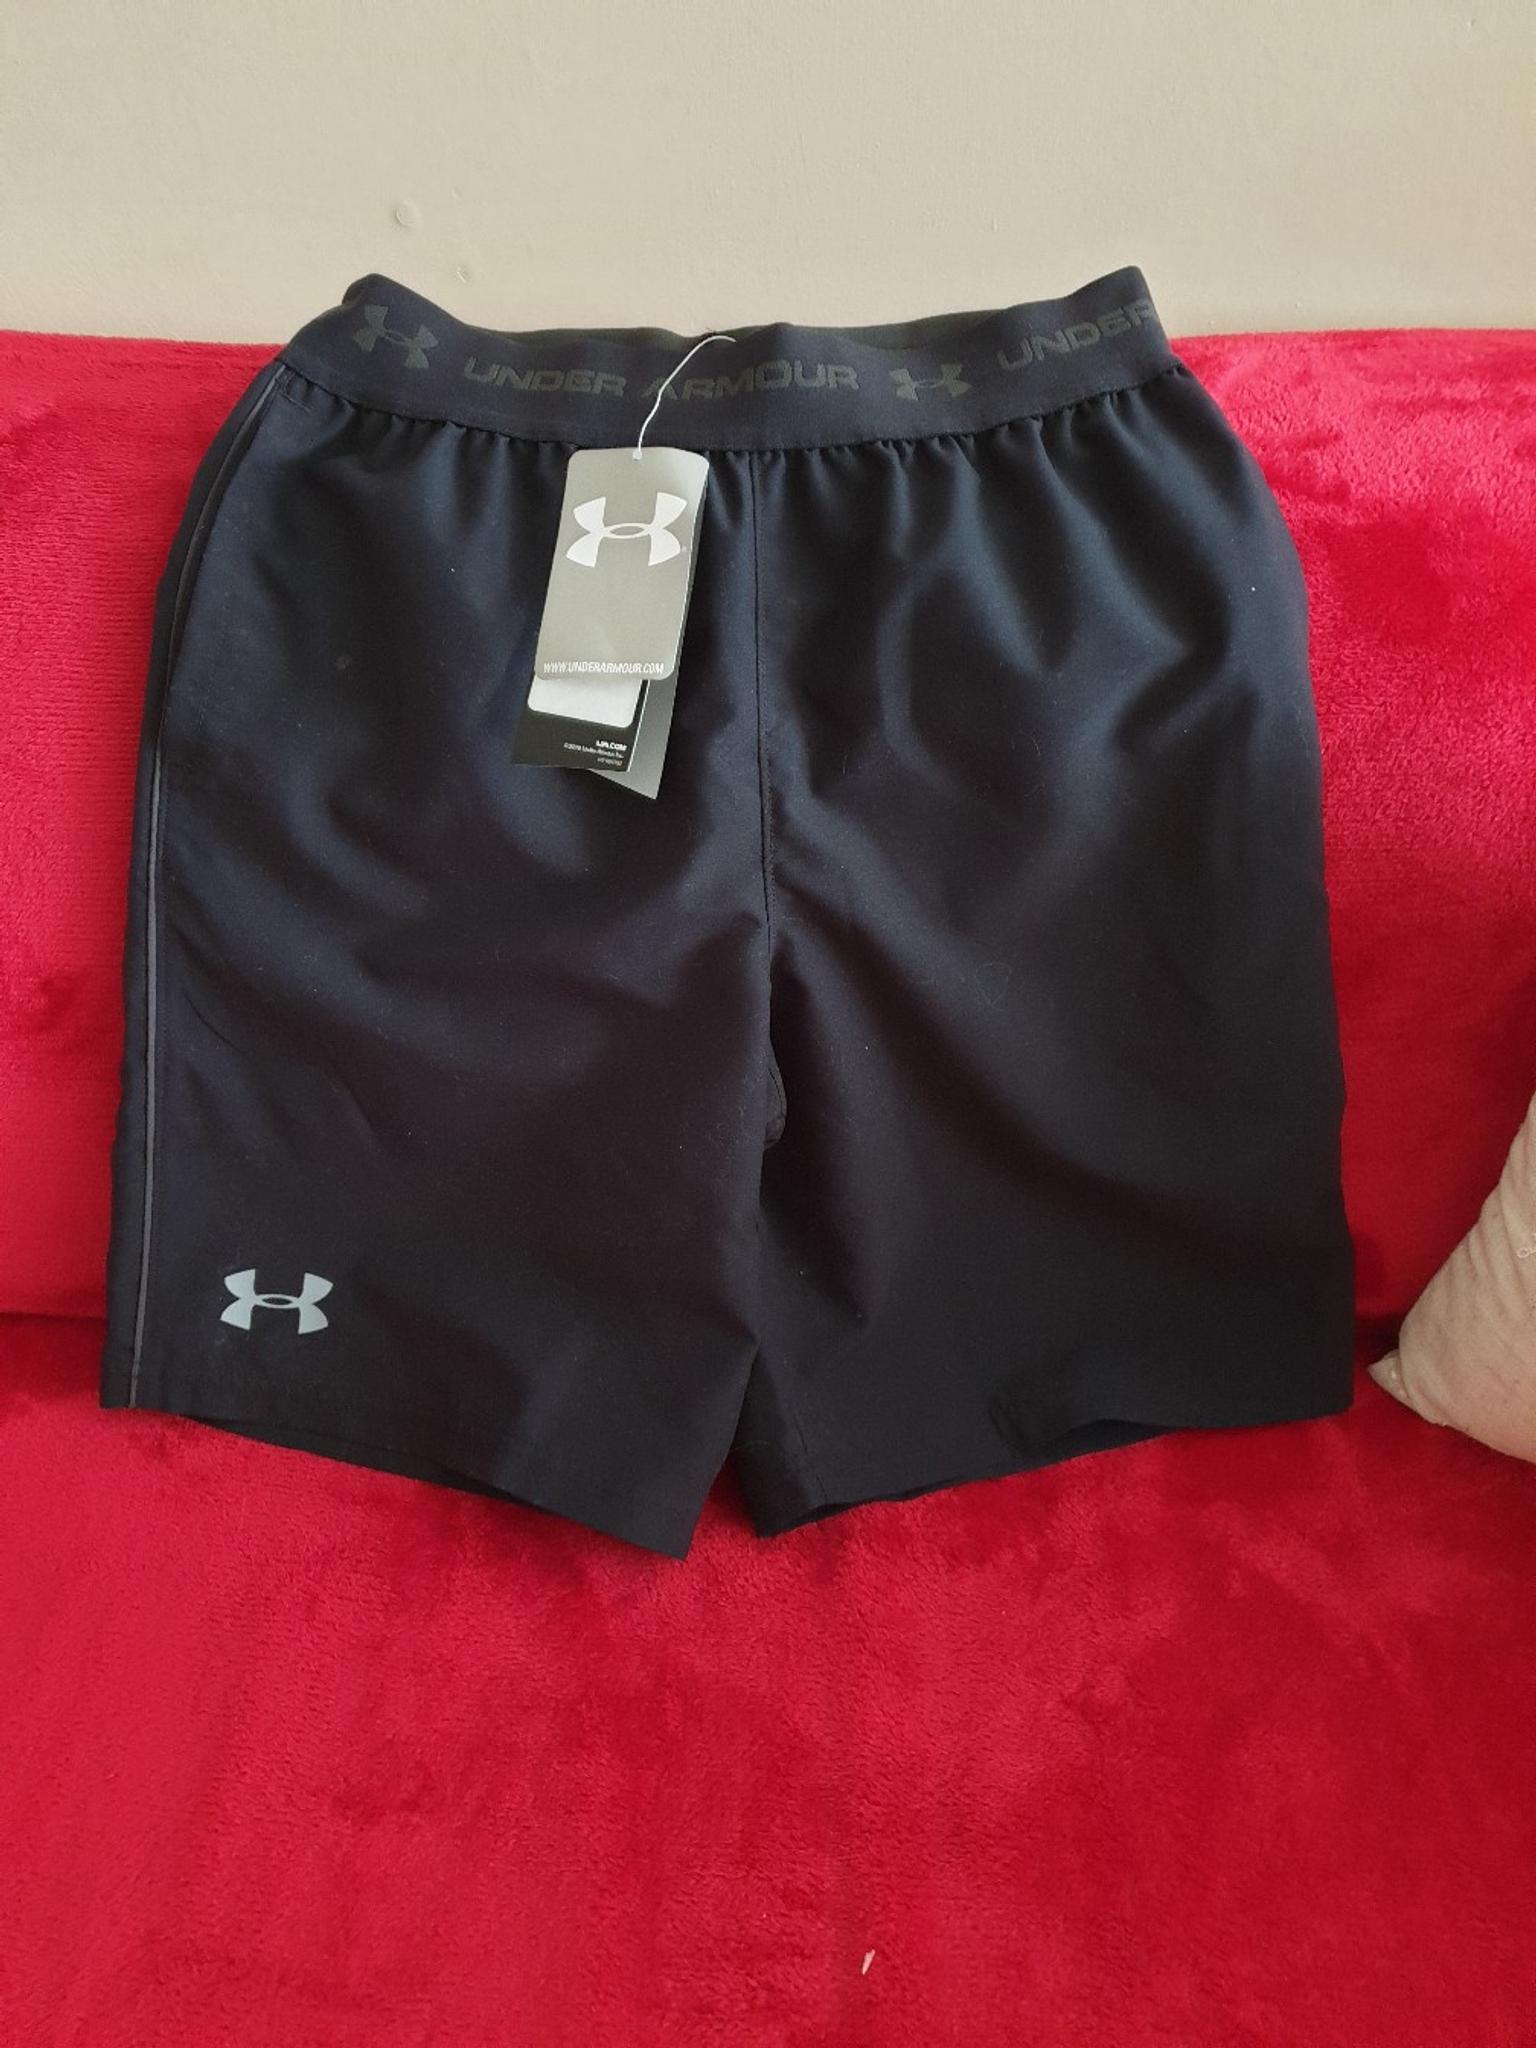 black and red under armour shorts